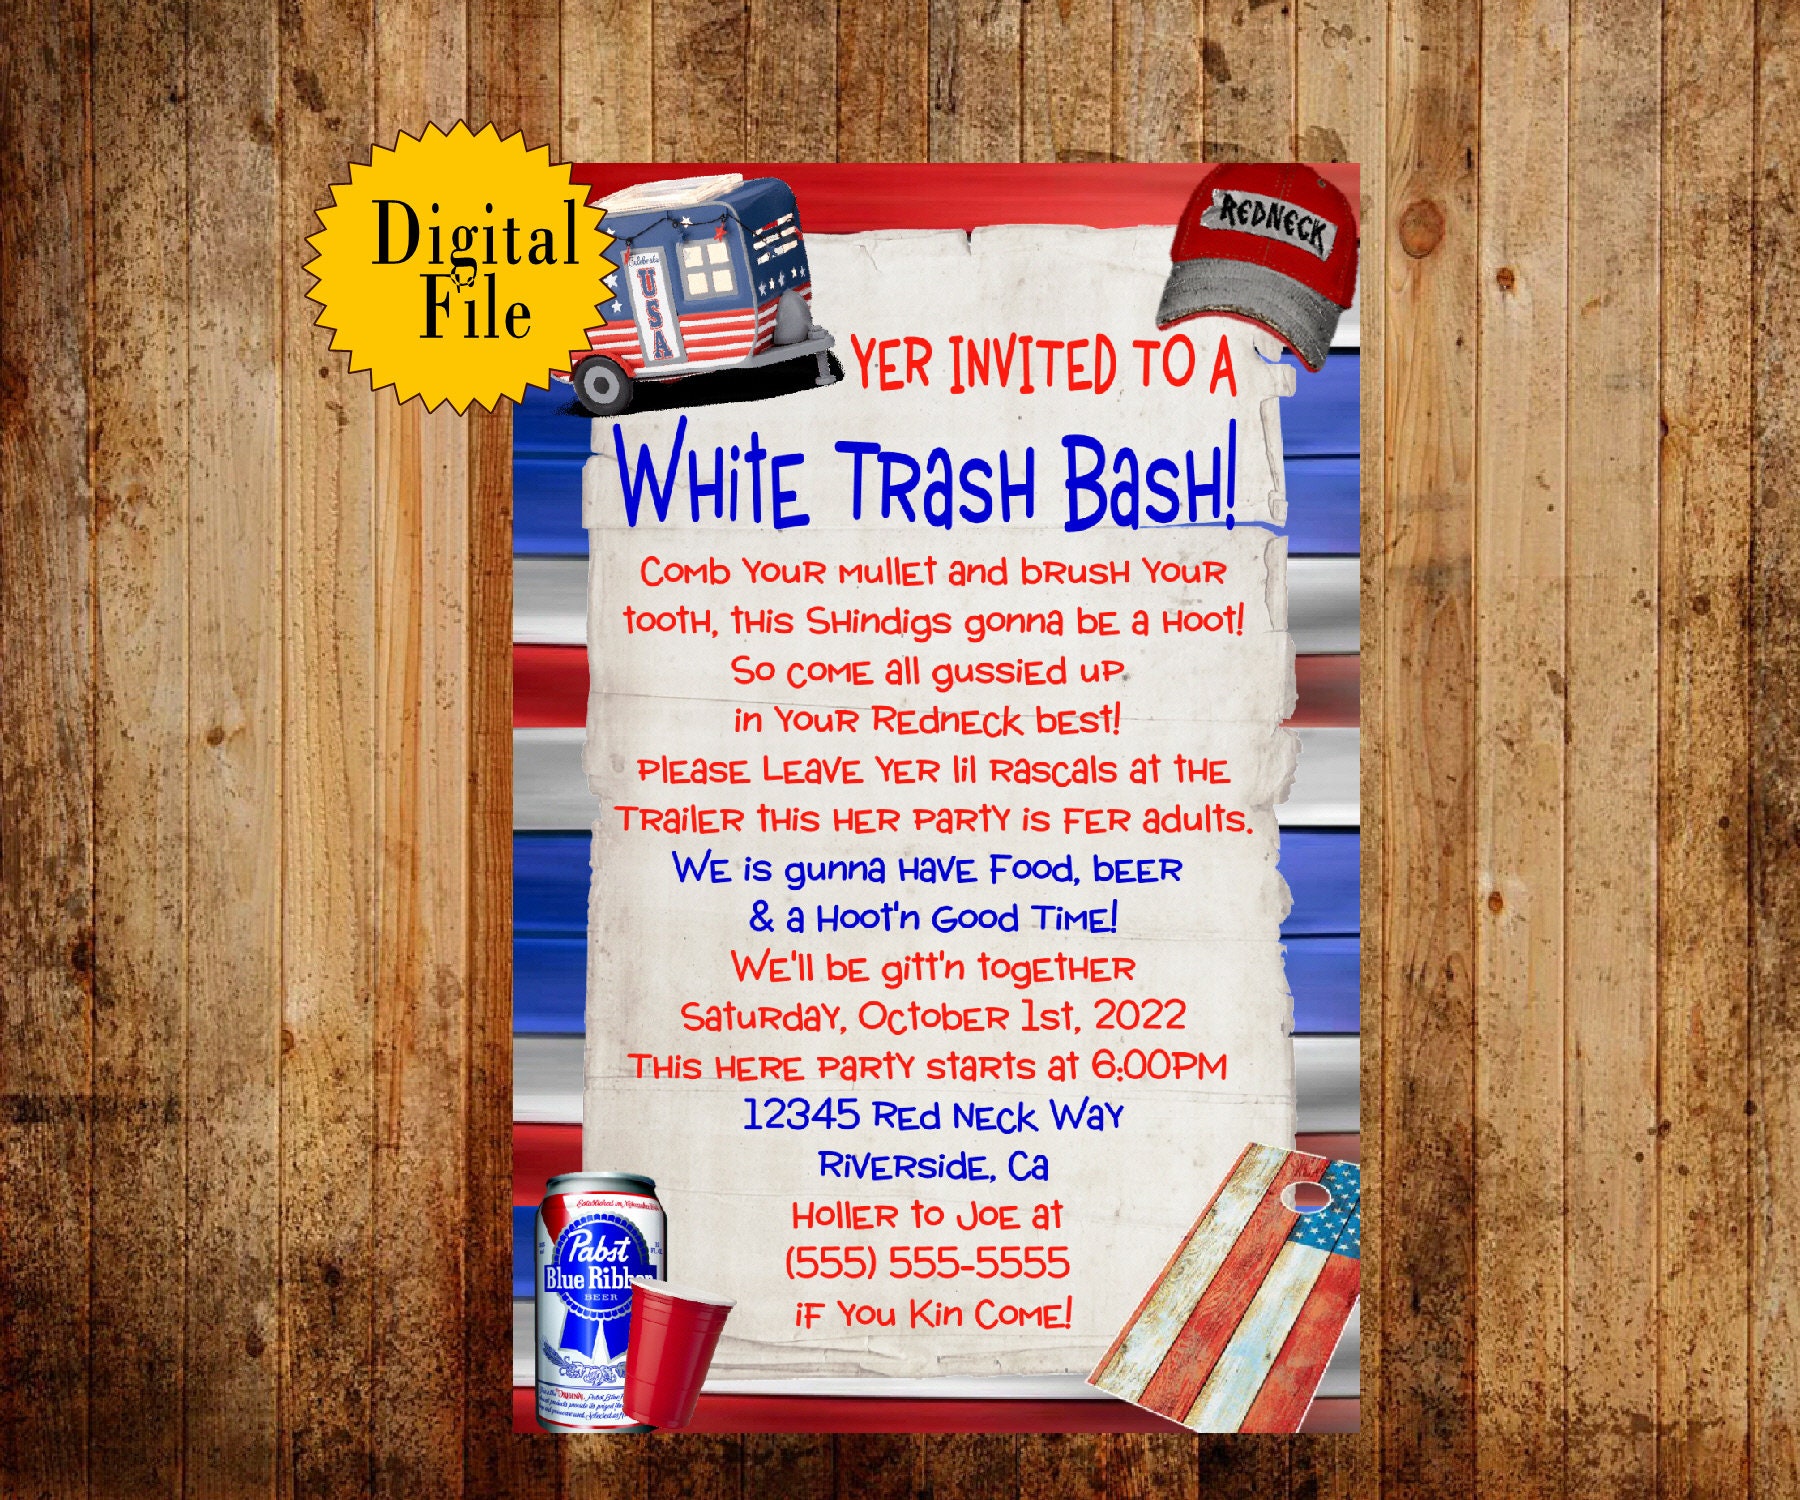 White Trash - All You Need to Know BEFORE You Go (with Photos)